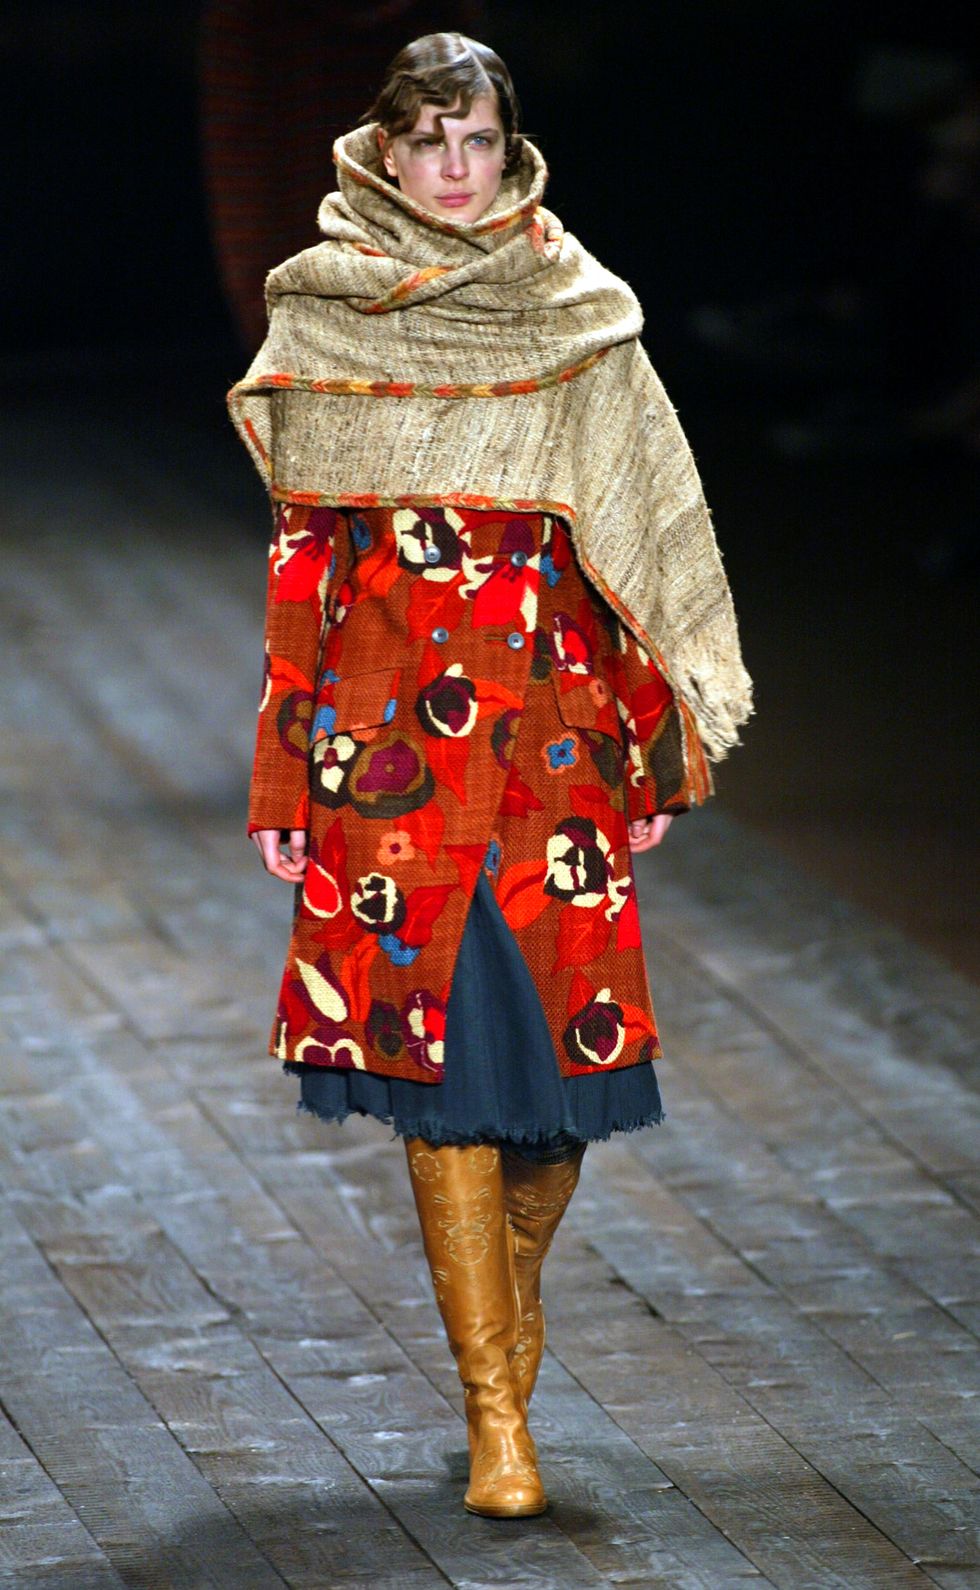 paris, france a model presents a creation for belgian designer dries van noten 08 march 2002 in paris during the autumn winter 20022003 ready to wear collections afp photo pierre verdy photo credit should read pierre verdyafp via getty images